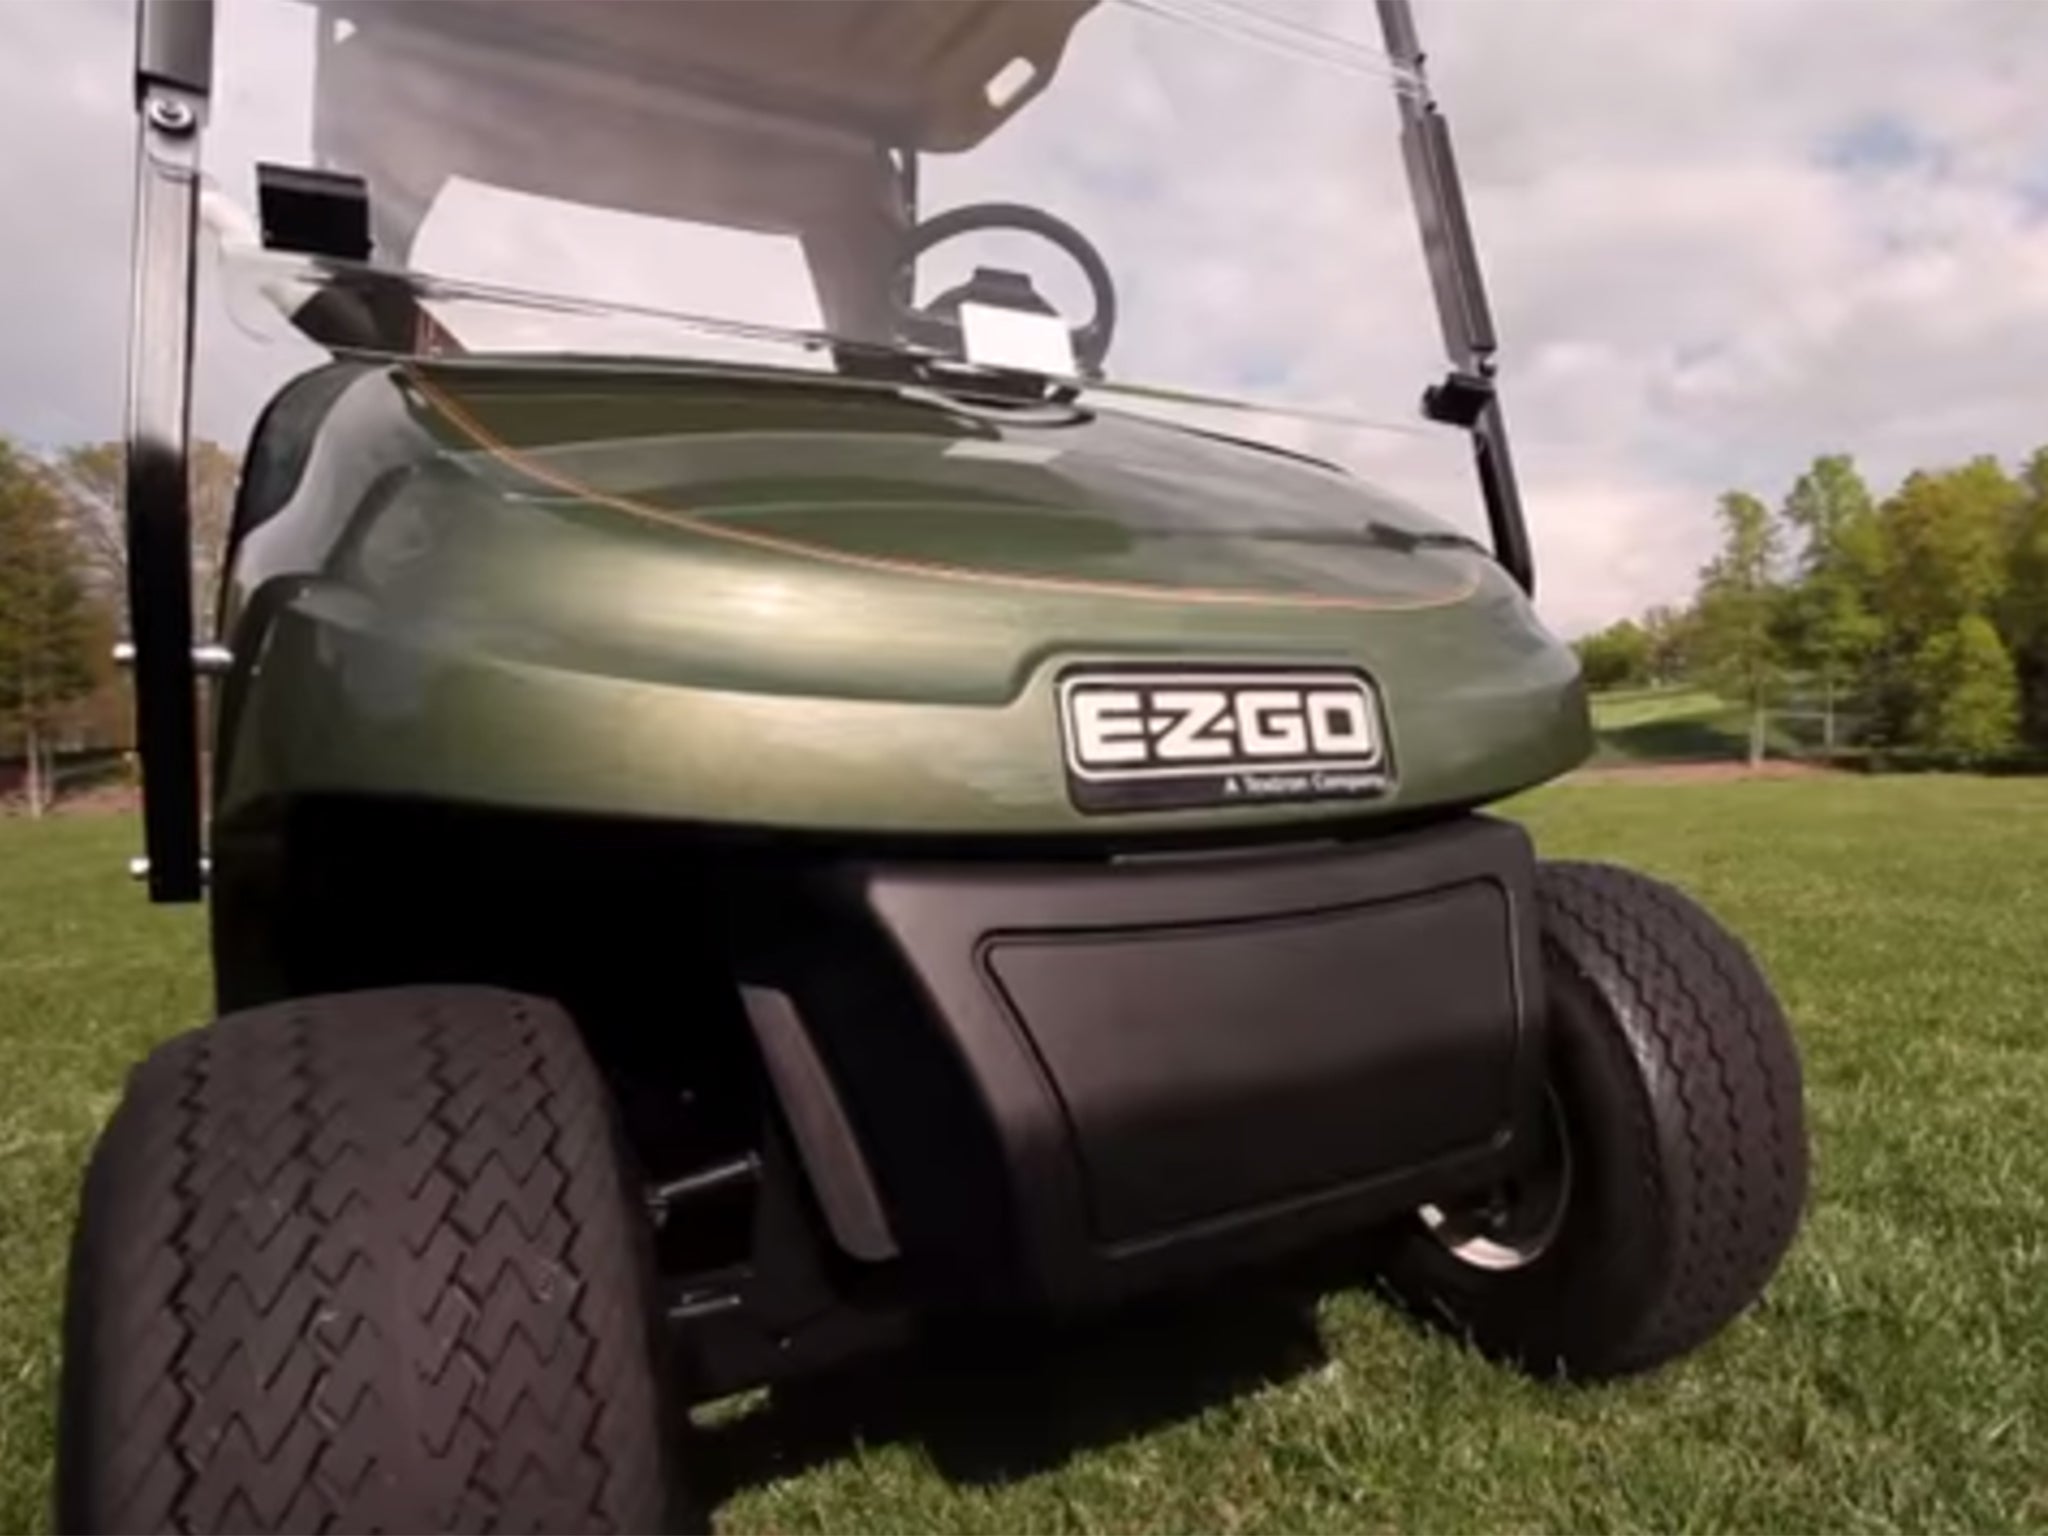 A man has died after three people took a golf cart for a ride while drunk